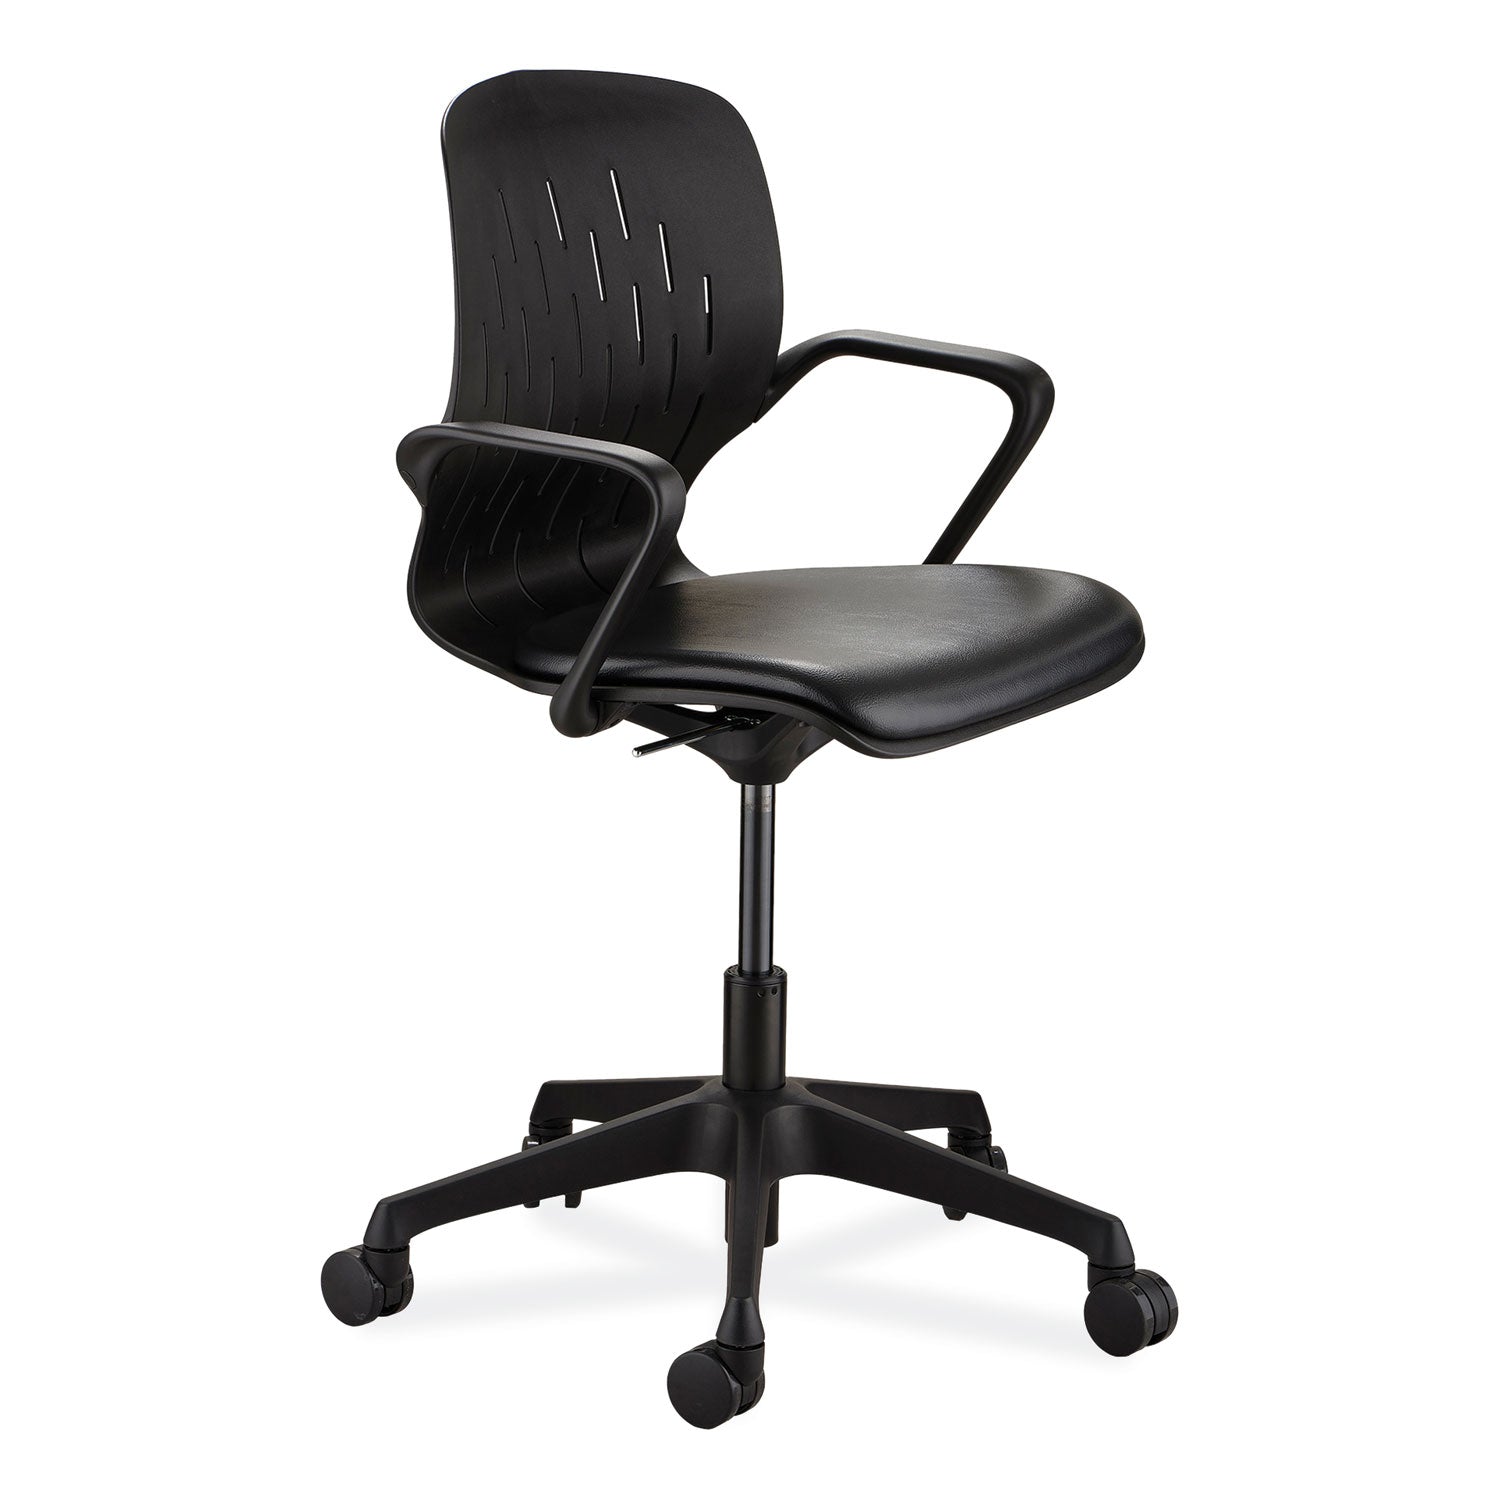 shell-desk-chair-supports-up-to-275-lb-17-to-20-seat-height-black-seat-back-black-base-ships-in-1-3-business-days_saf7013bl - 1